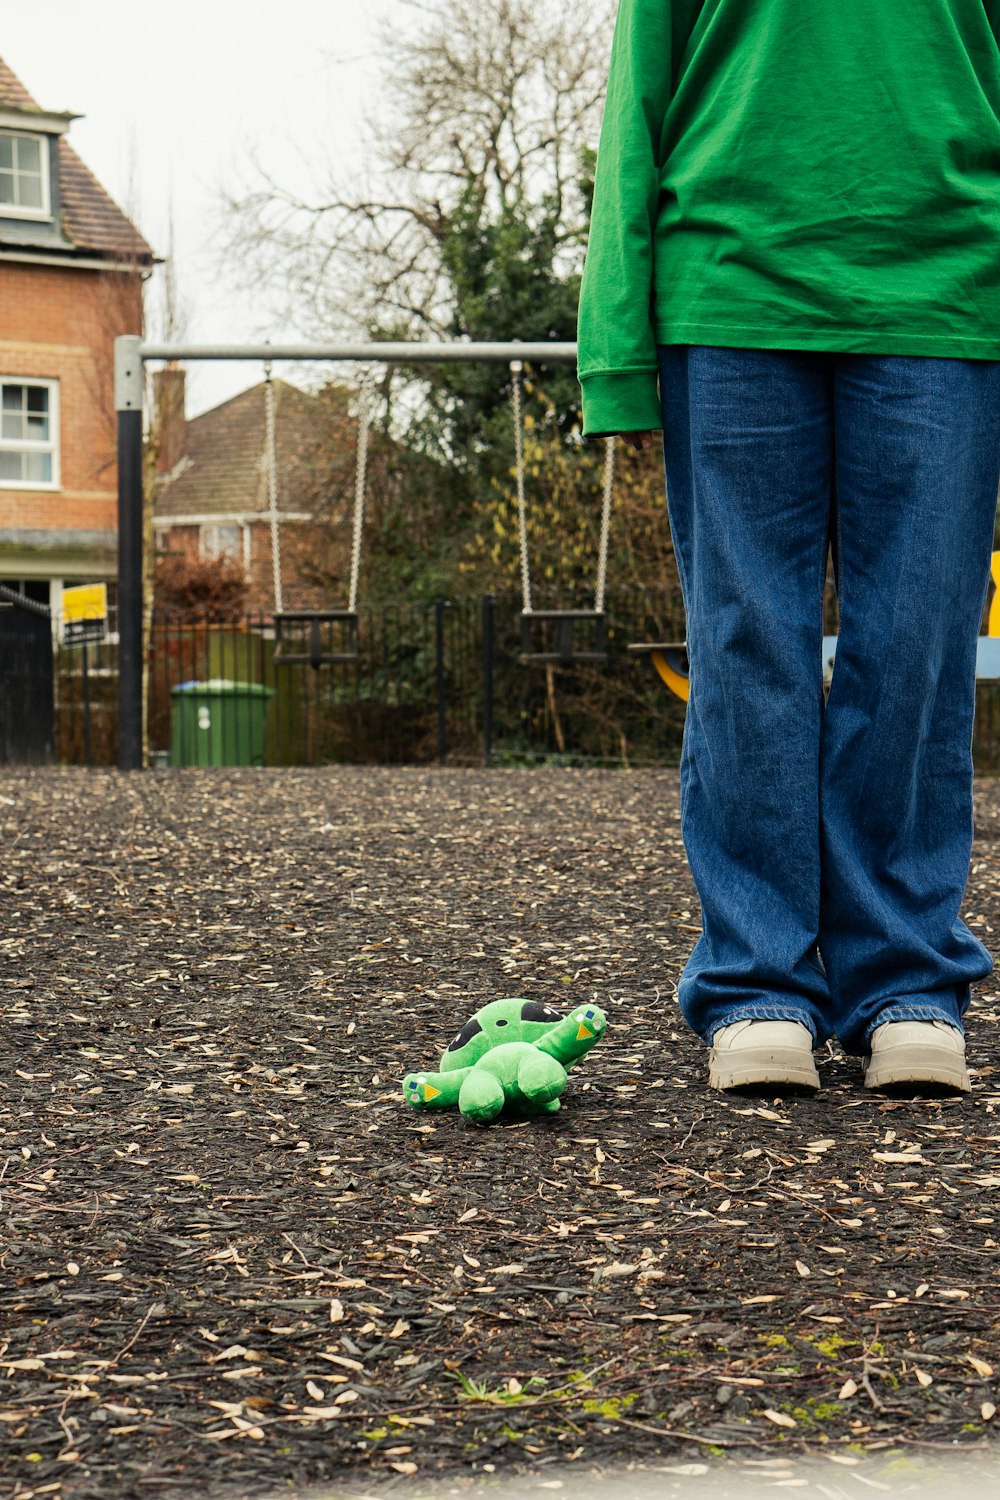 a person standing next to a green stuffed animal